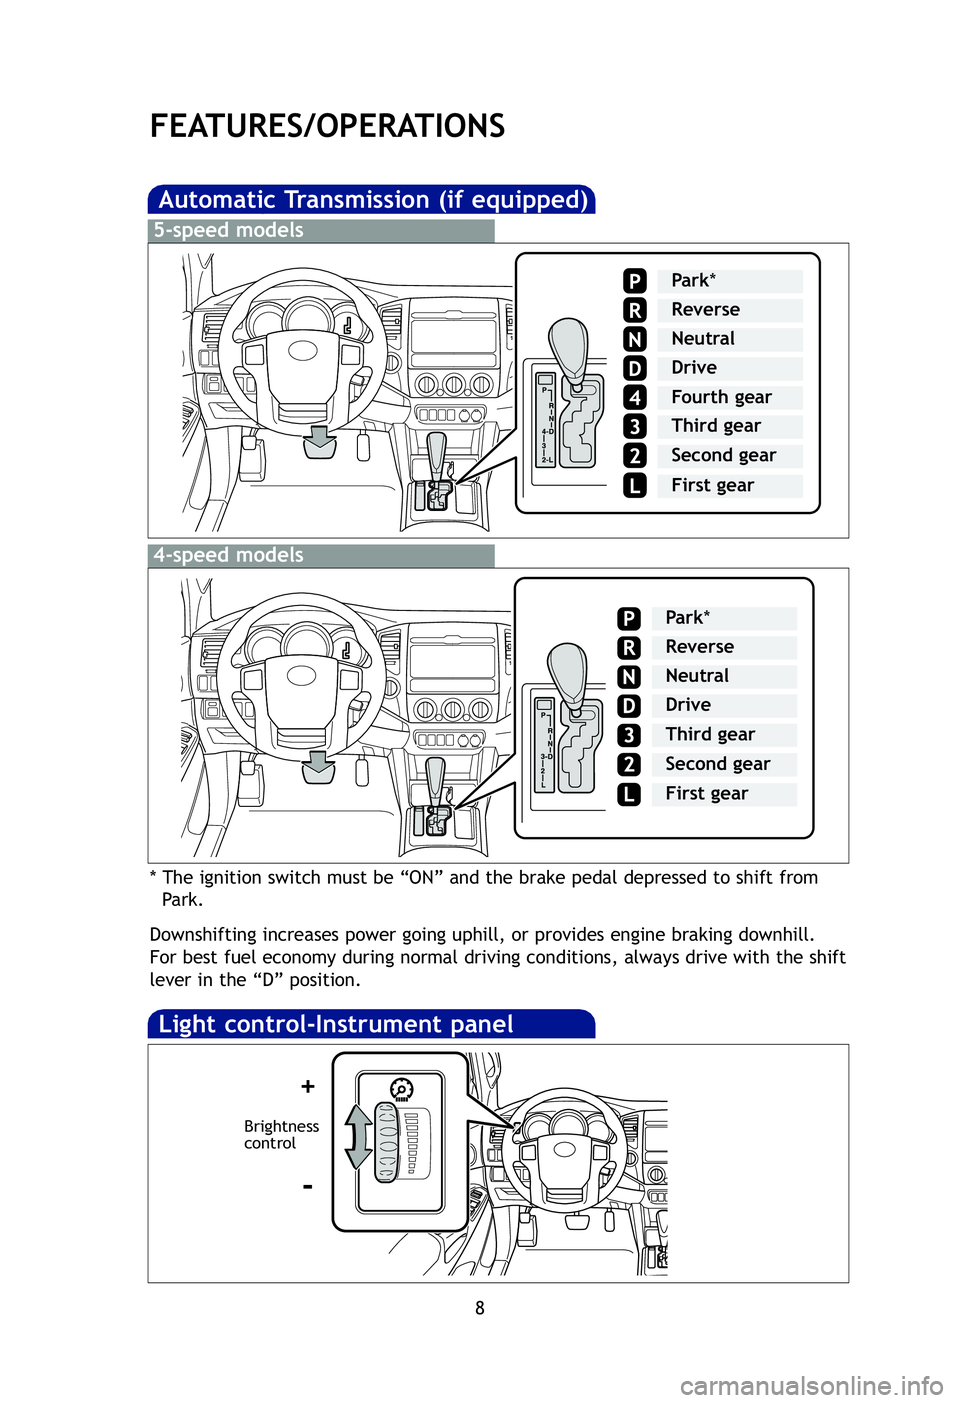 TOYOTA TACOMA 2012  Owners Manual (in English) 8
FEATURES/OPERATIONS
Automatic Transmission (if equipped)
* The ignition switch must be “ON” and the brake pedal depressed to \
shift from Park.
Downshifting increases power going uphill, or prov